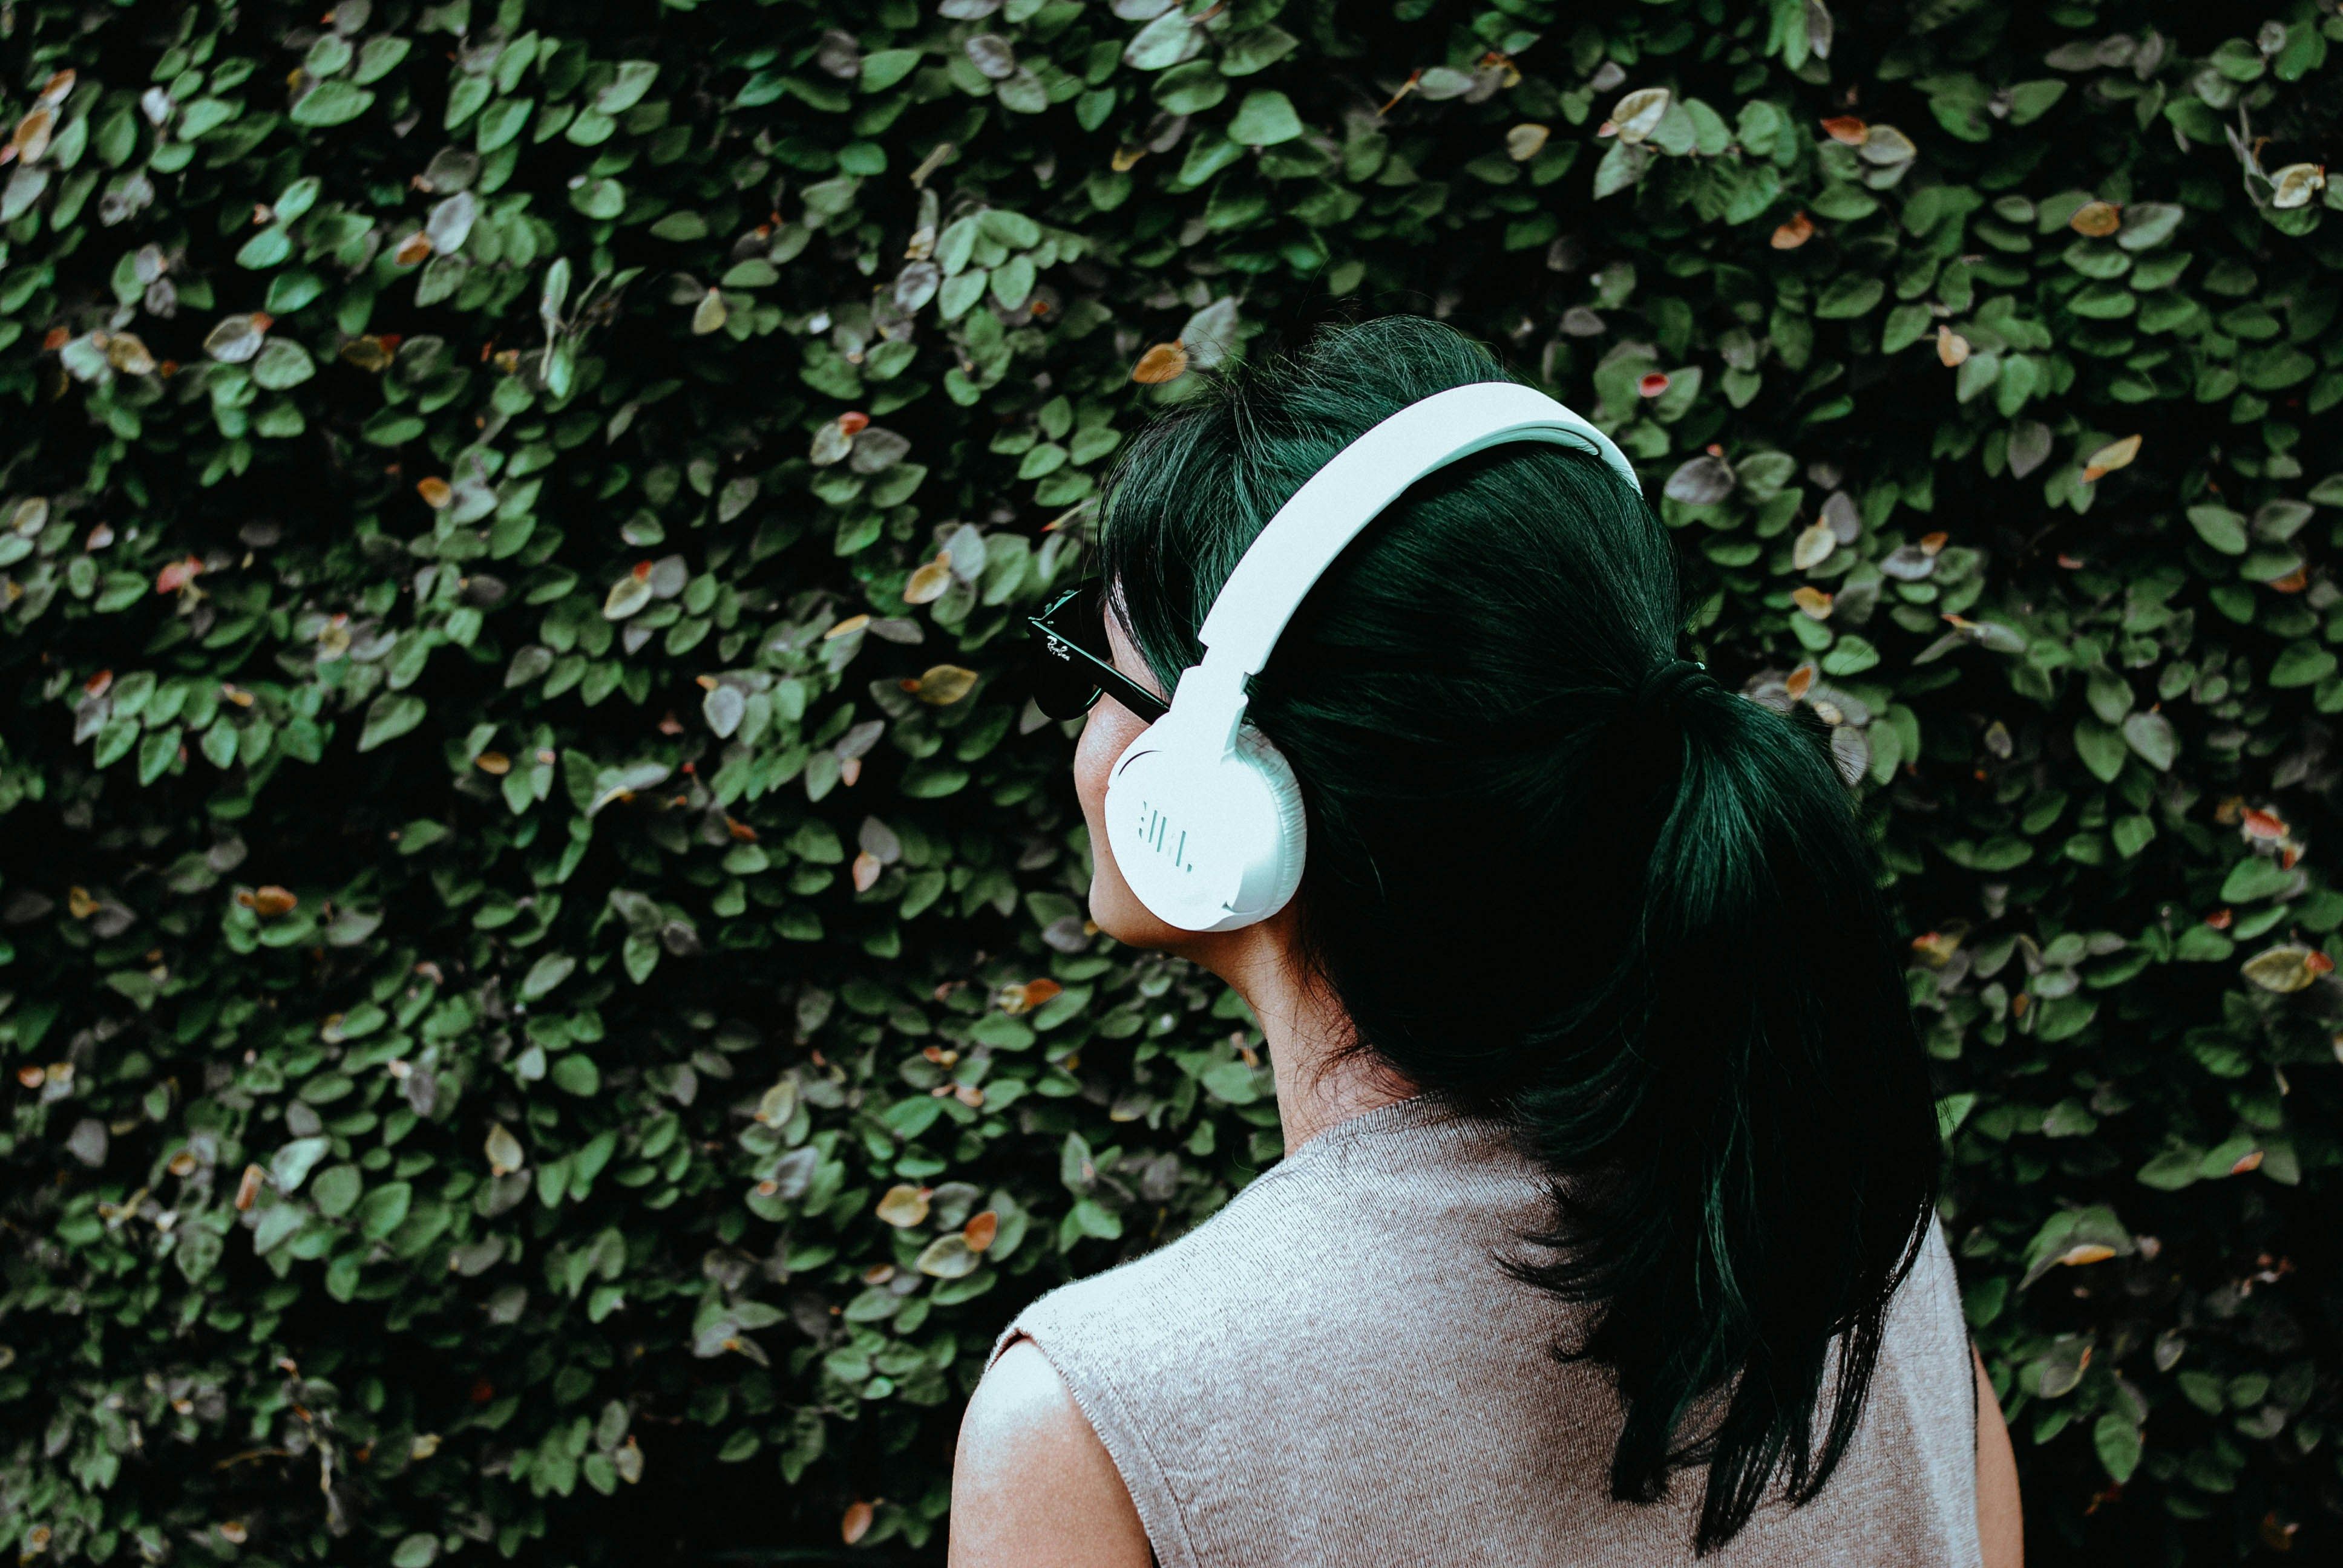 A person with a dark ponytail and white headphones stands facing a leafy bush.